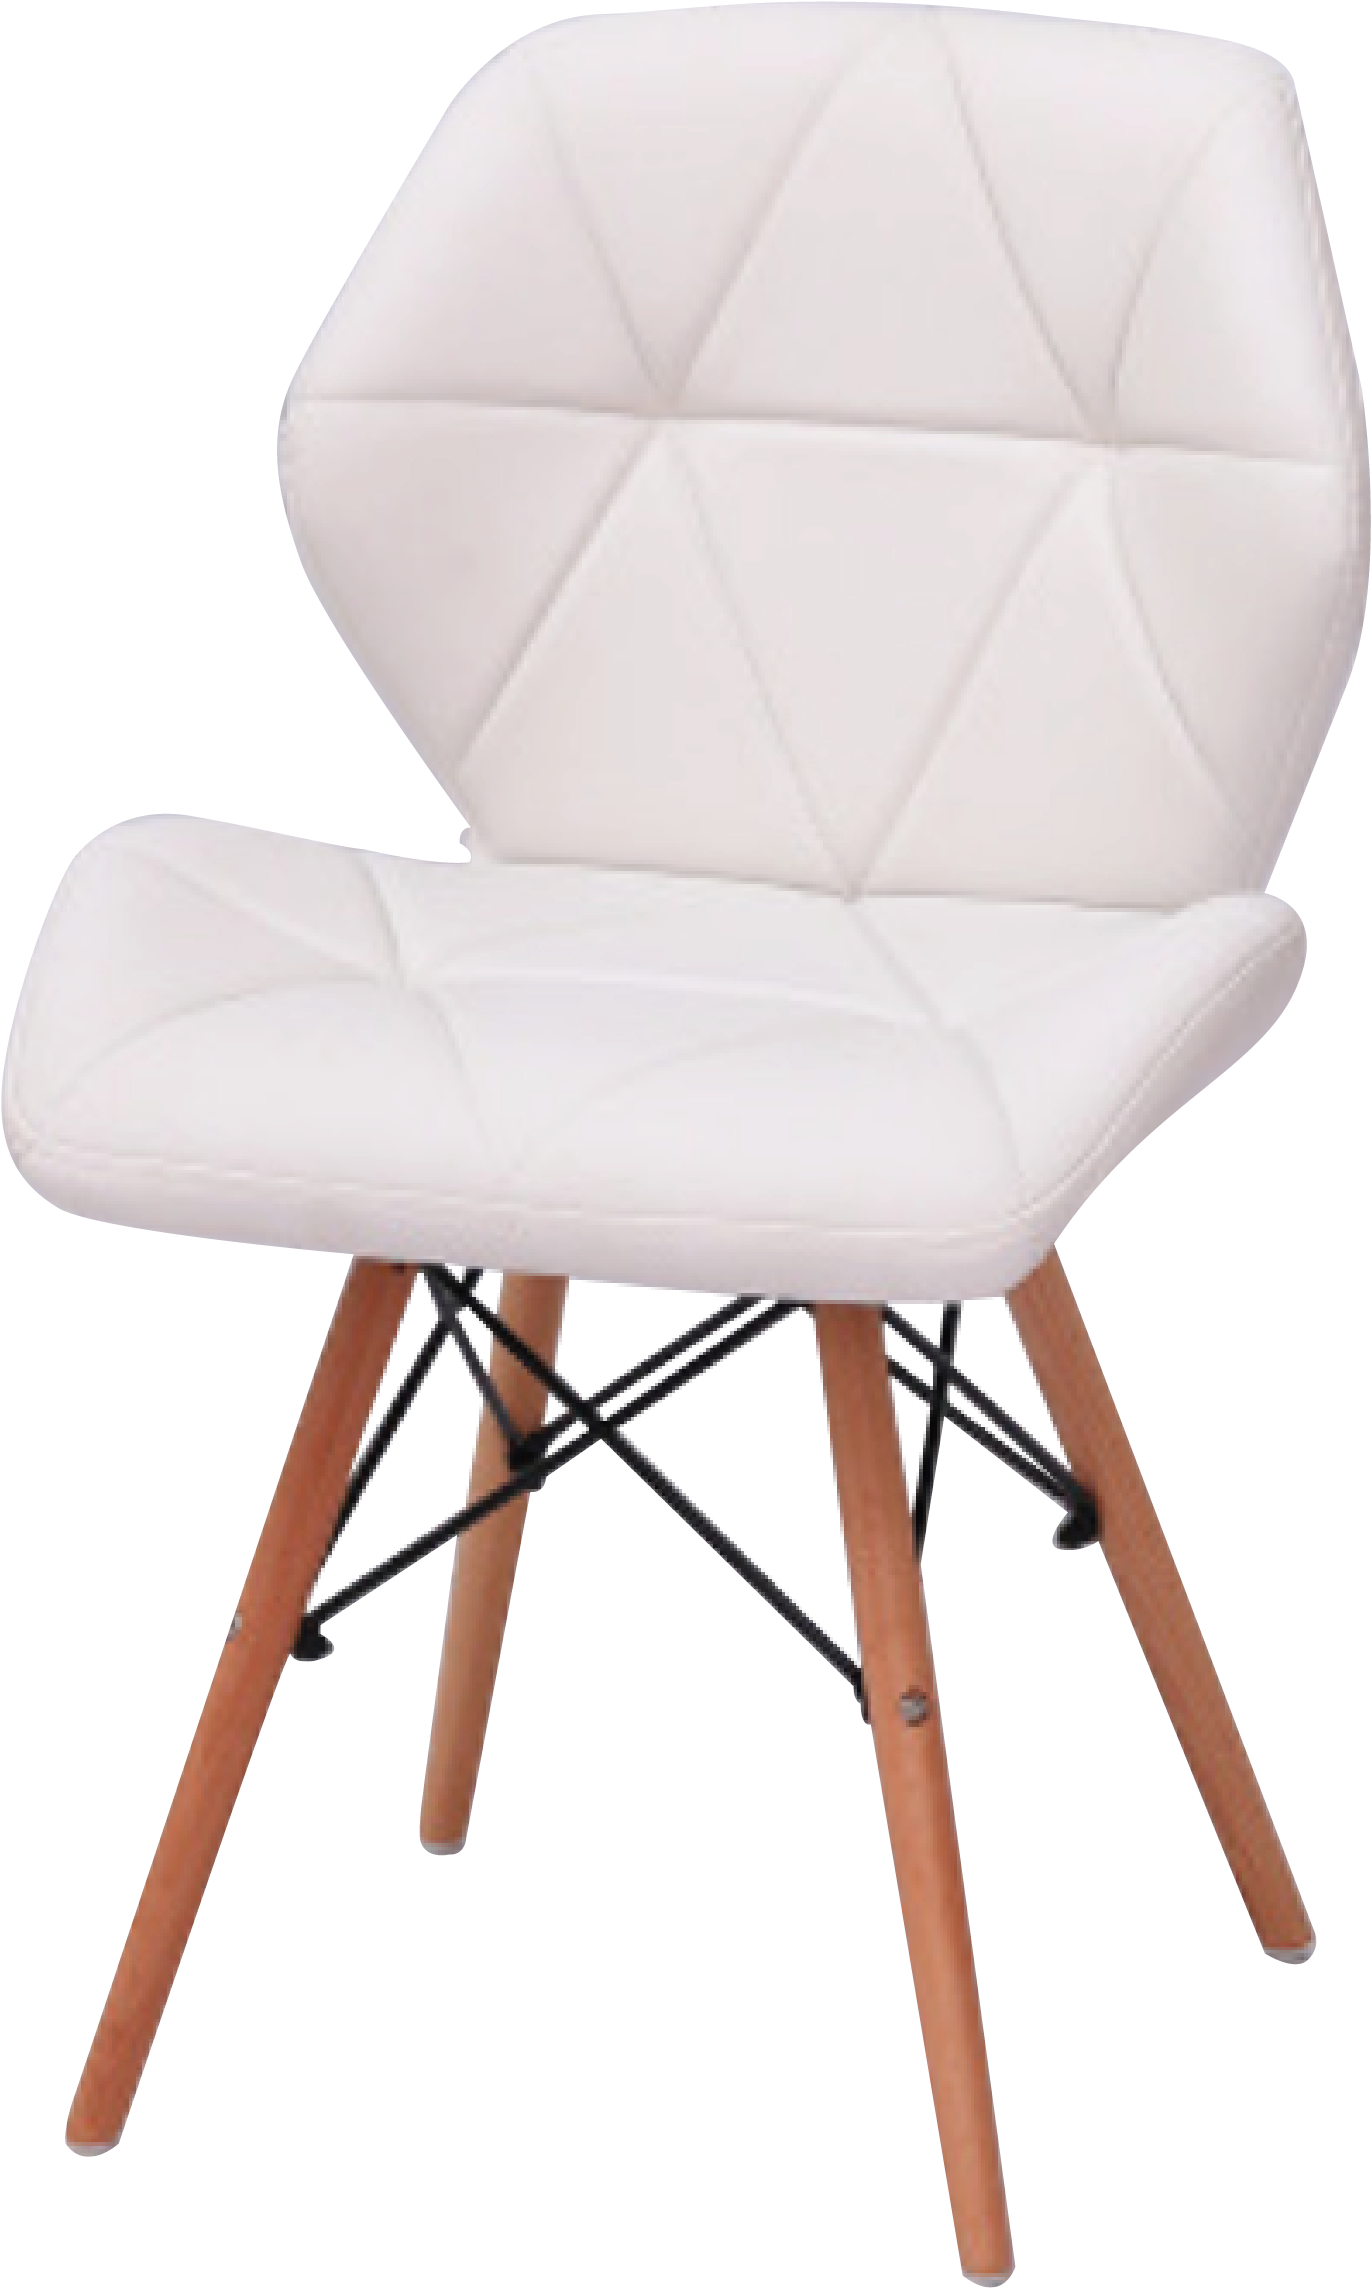 Modern White Club Chairwith Wooden Legs PNG image